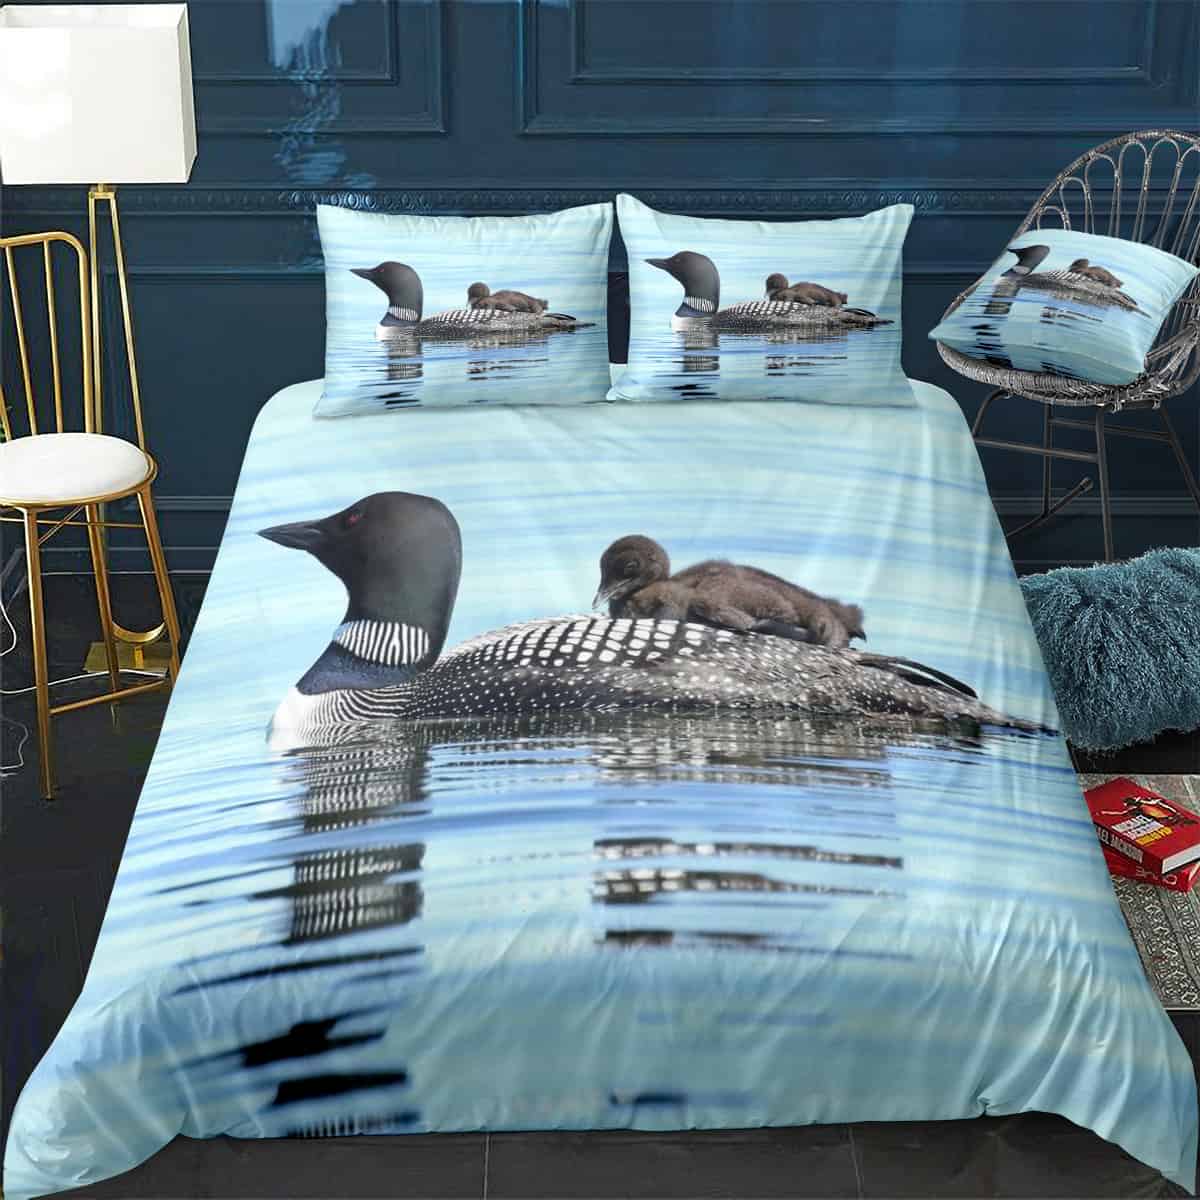 Baby Loon On Moms Back 1 Bedding Set